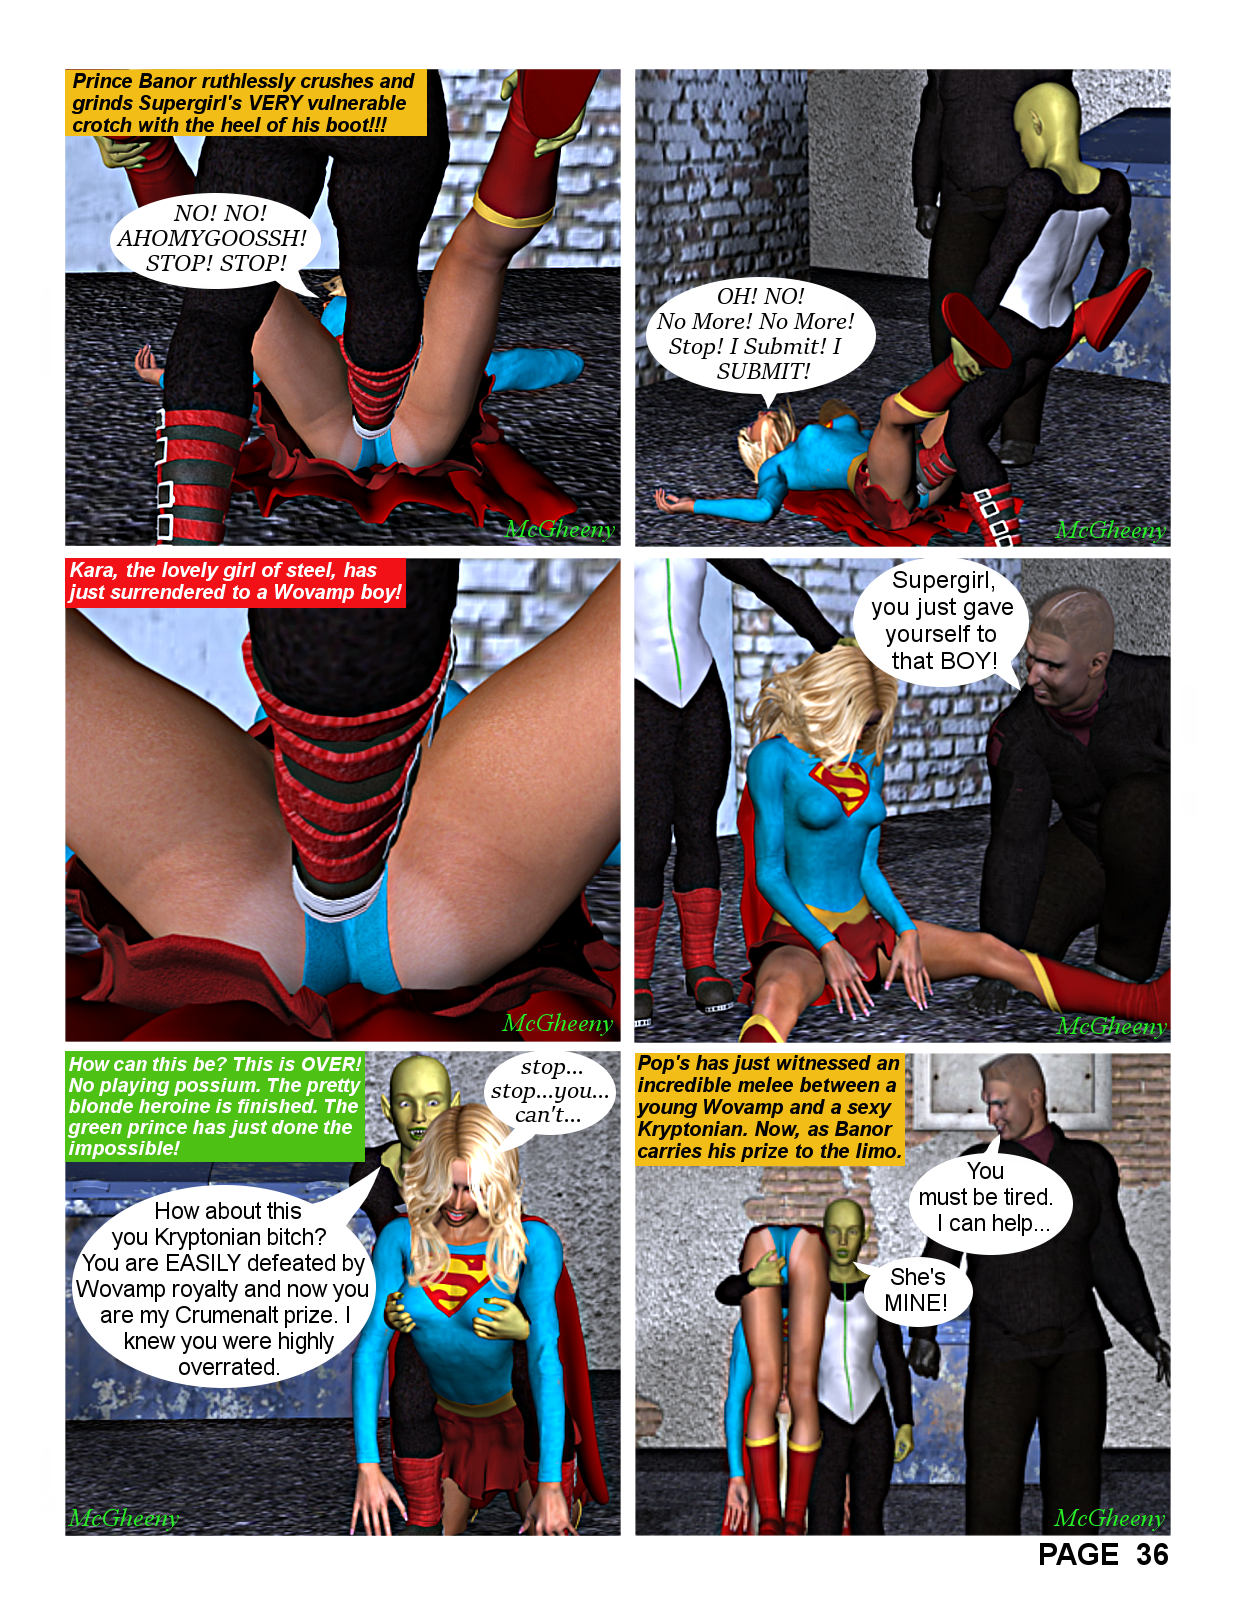 Supergirl in Banors Prize Page 36.png